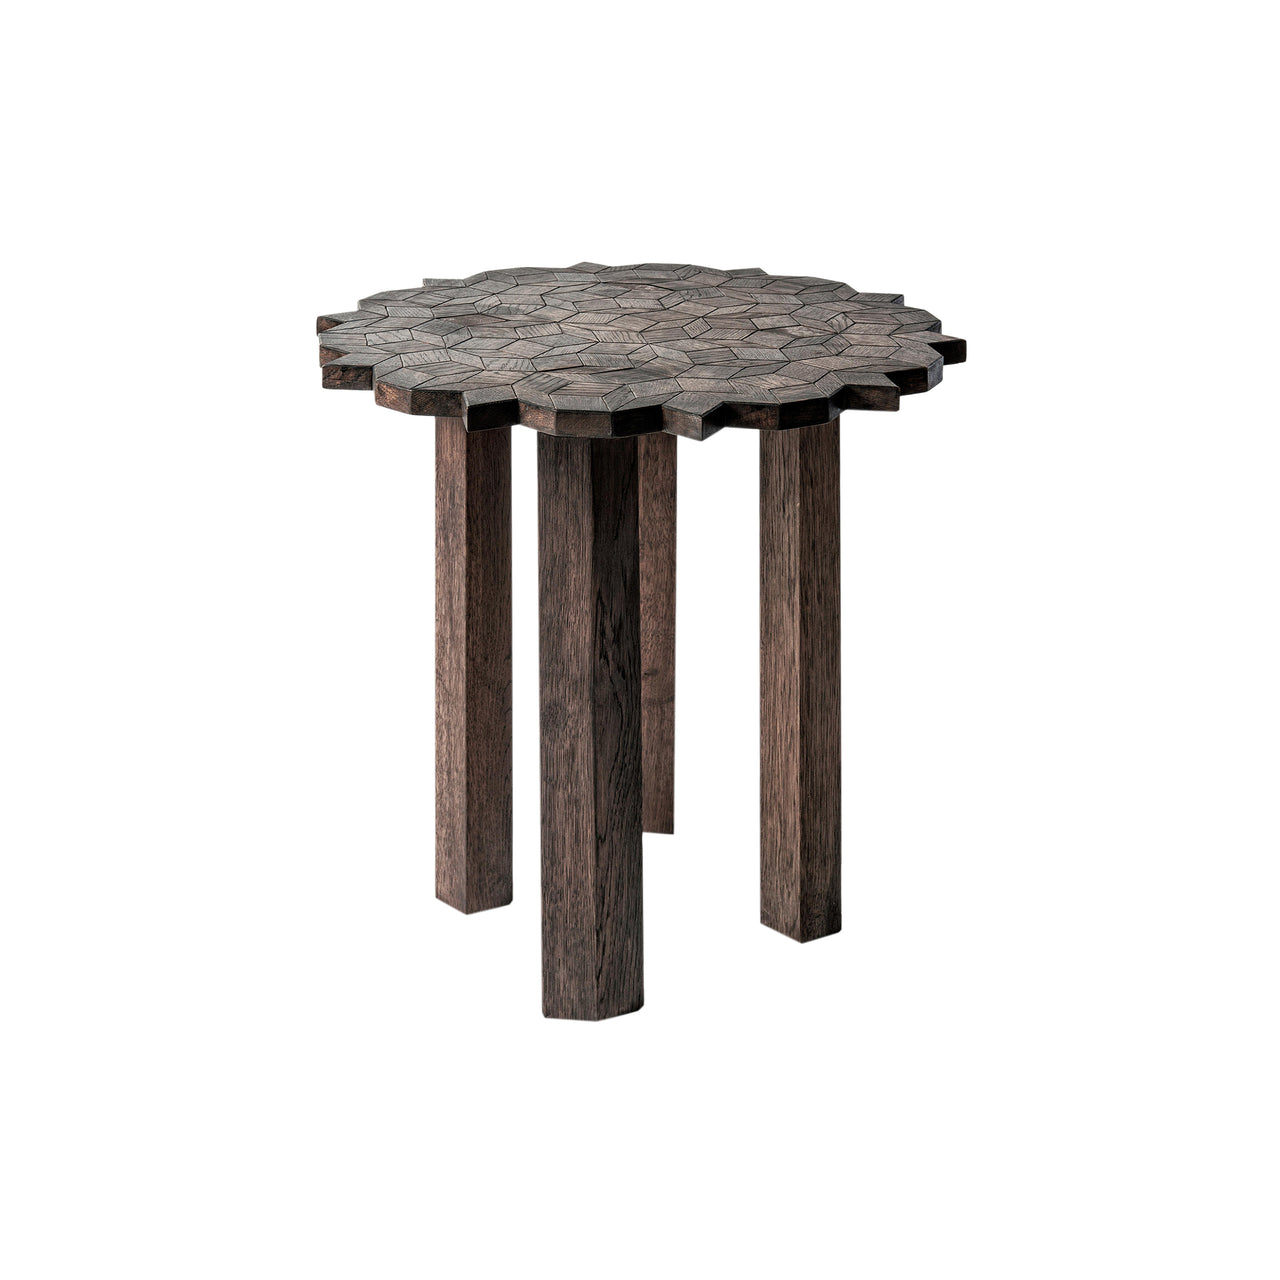 Ombra Side Table: Wenge Maple